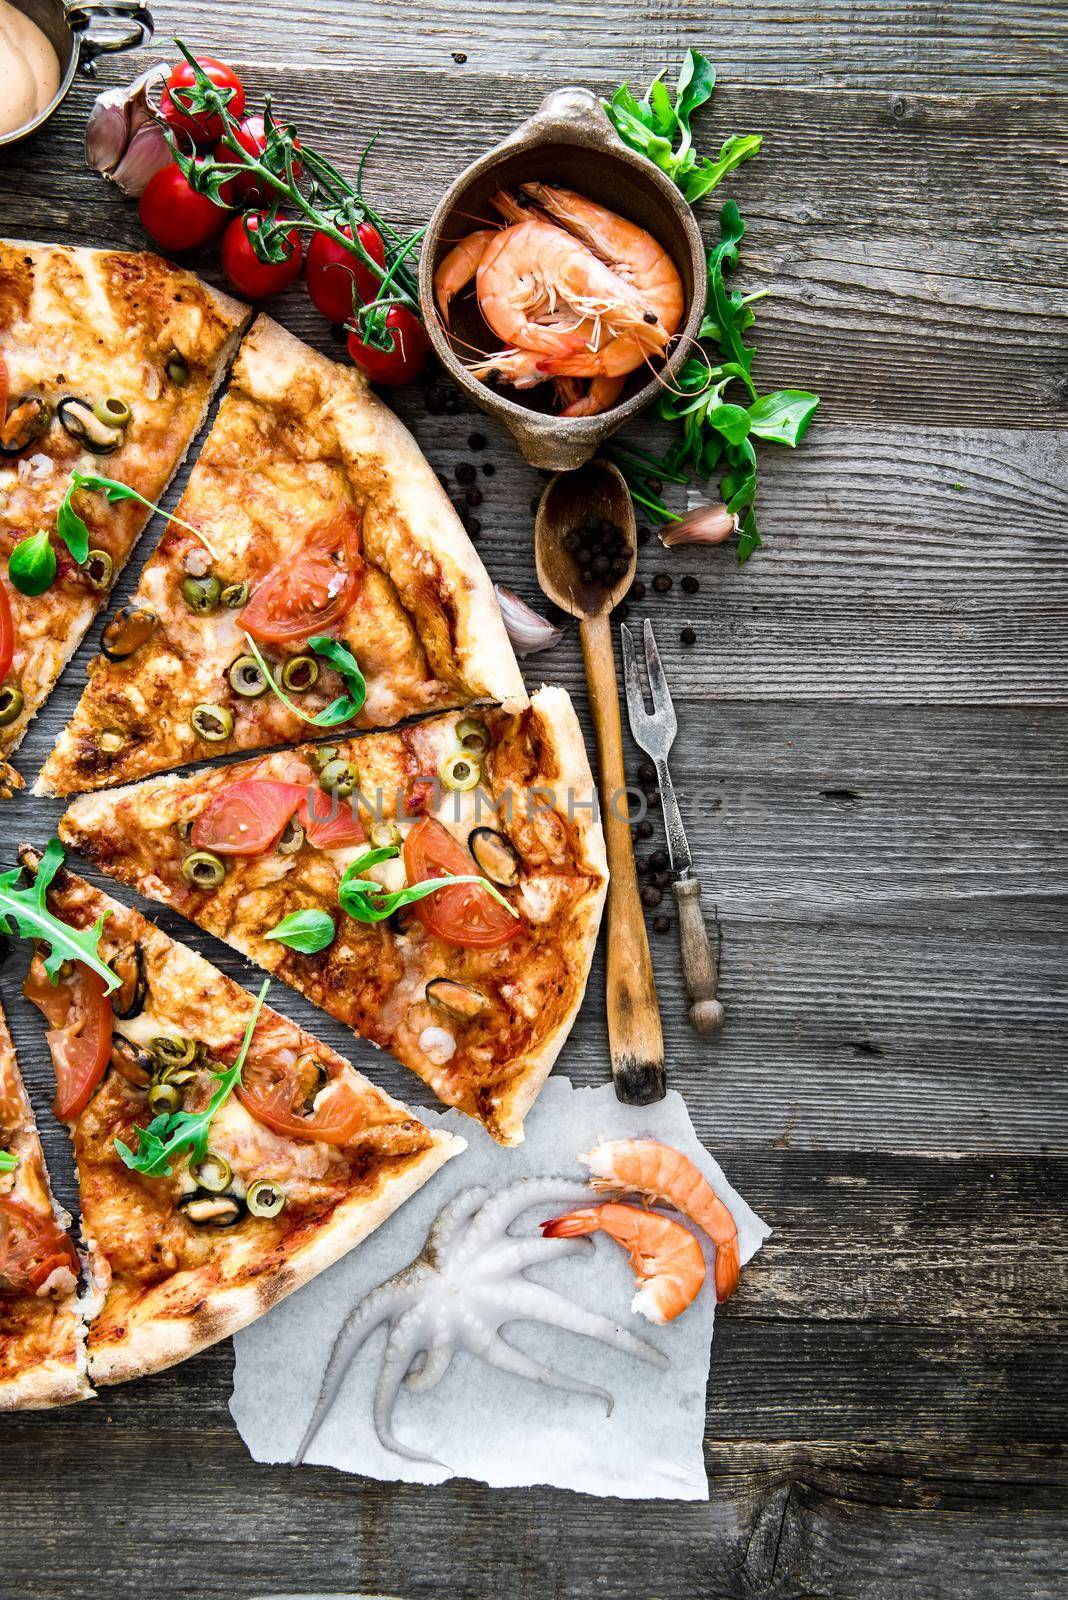 delicious pizza with seafood on wooden table